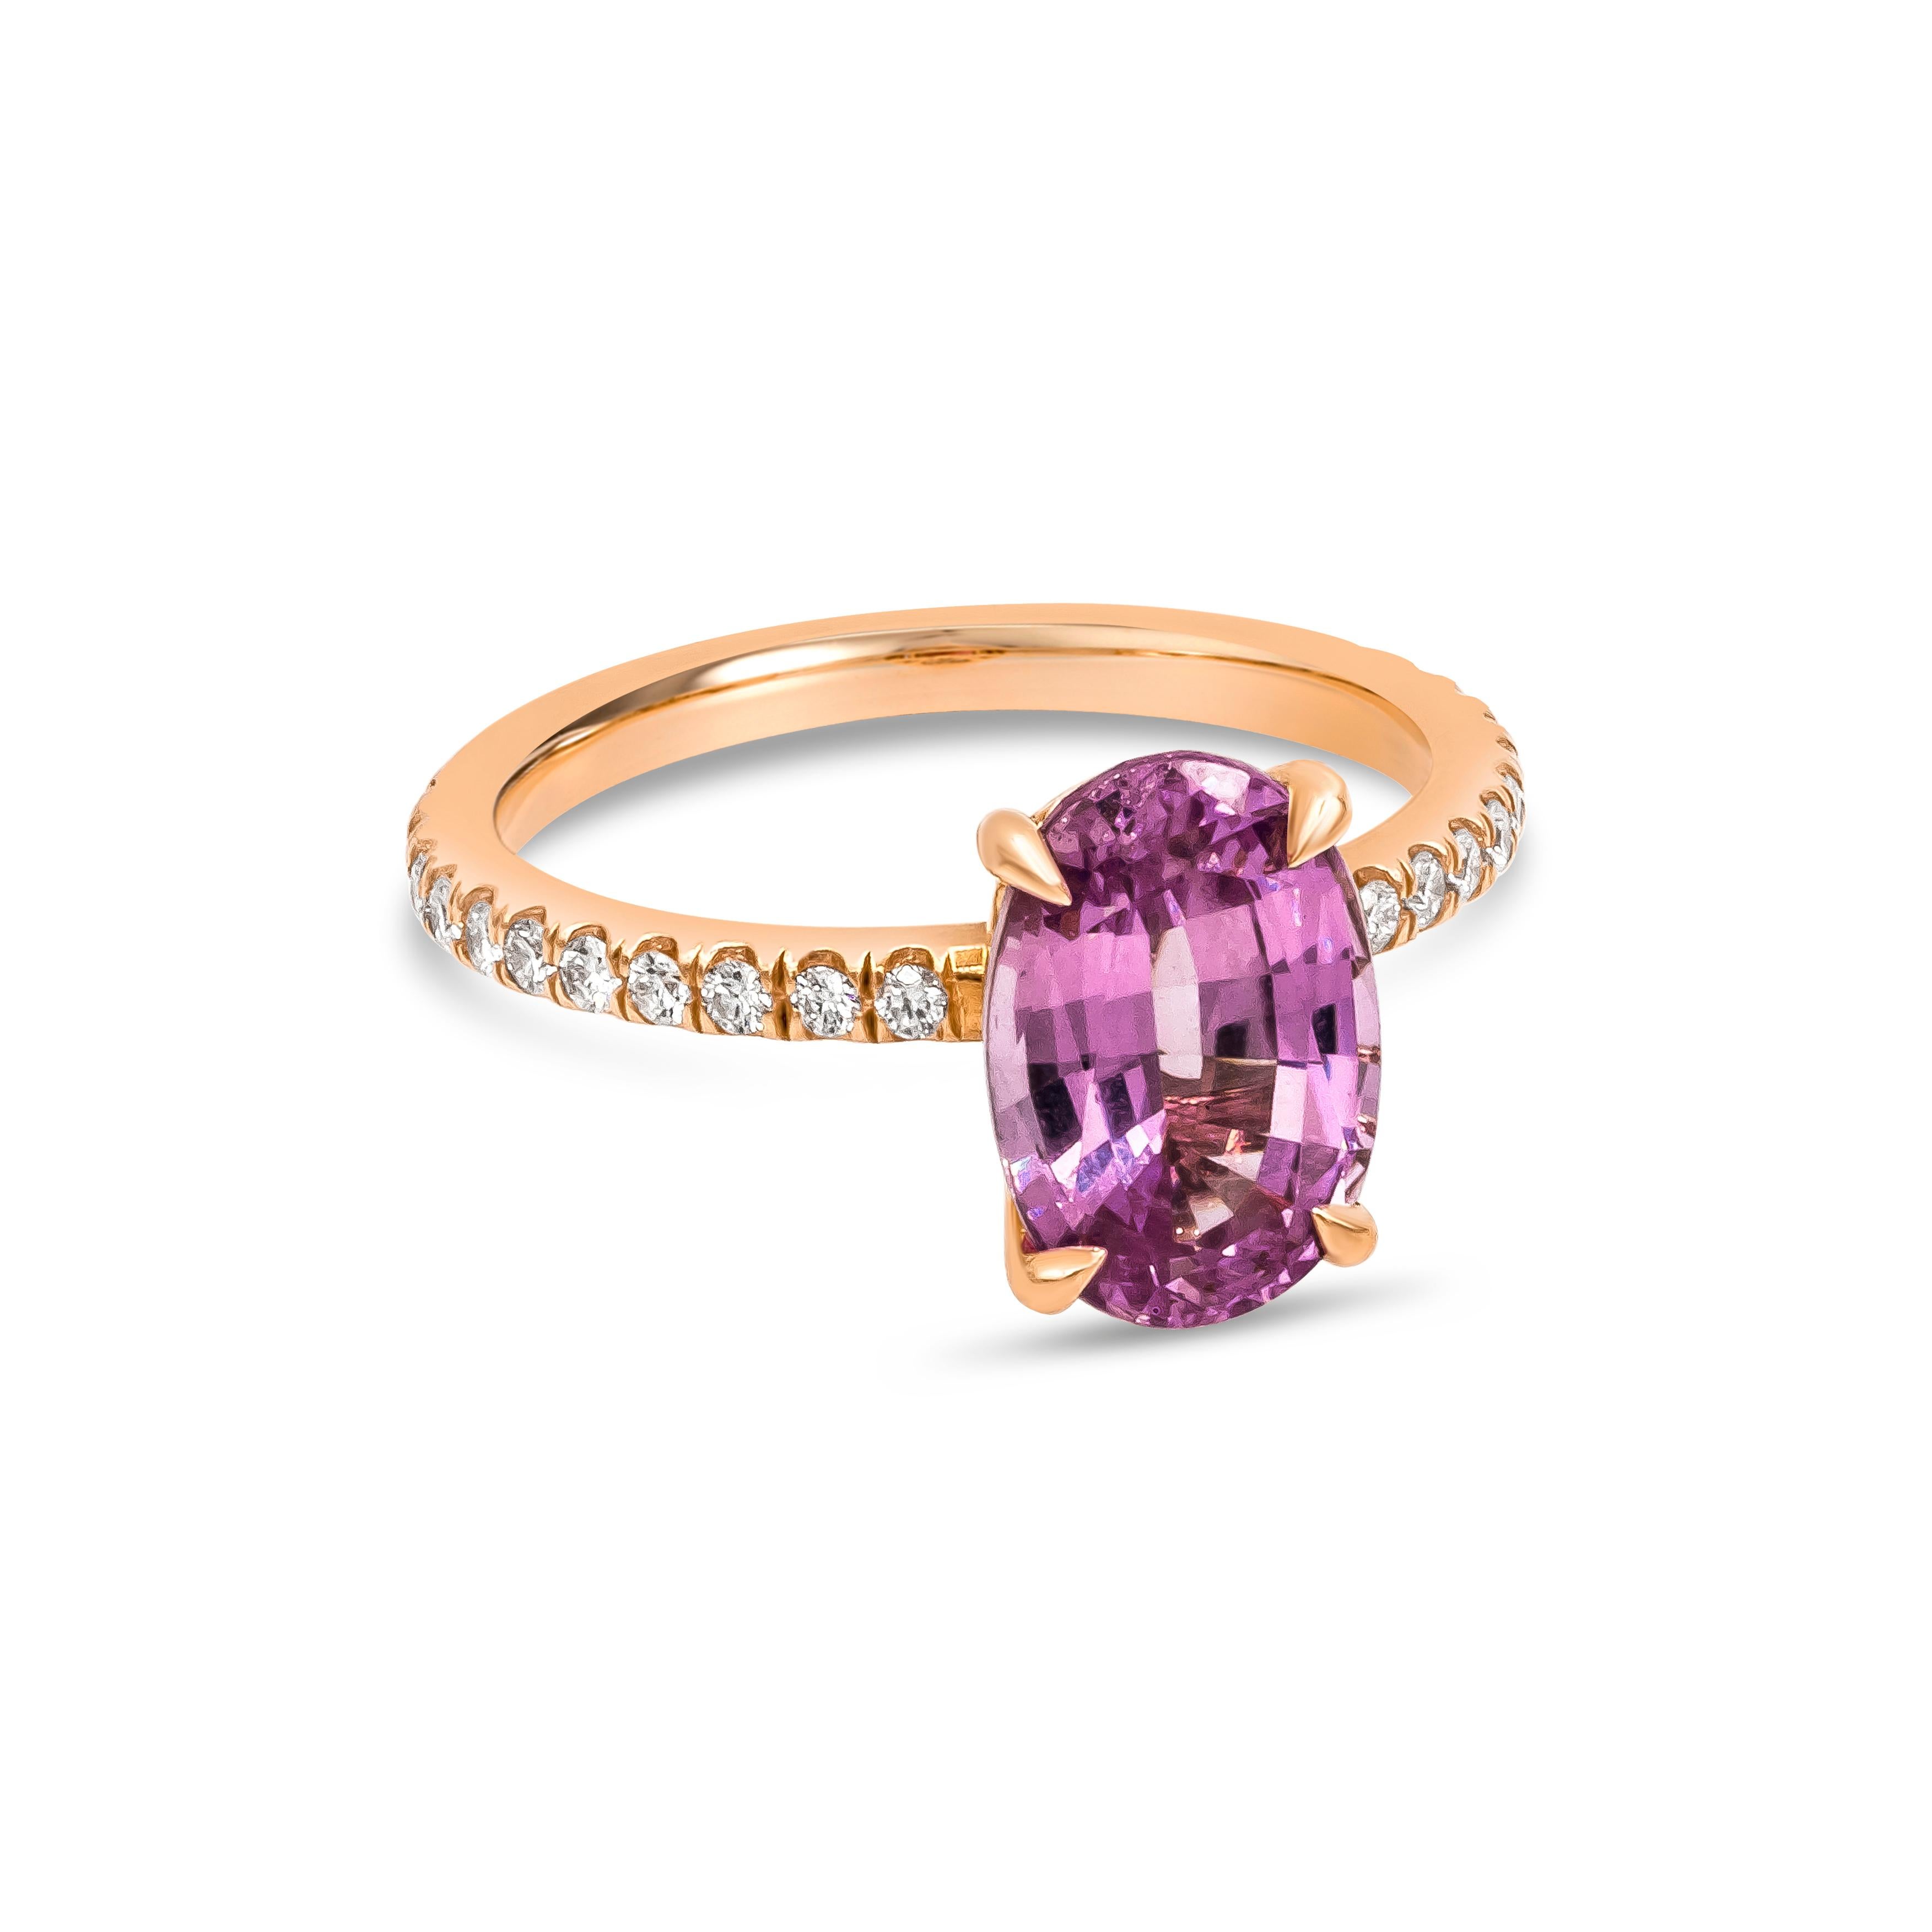 A color-rich engagement ring showcasing a 3.38 carats oval cut pink sapphire certified by GIA as no indications of heating which makes the stone more rare. Set in a four prong basket setting and encrusted with 22 brilliant round diamonds on the